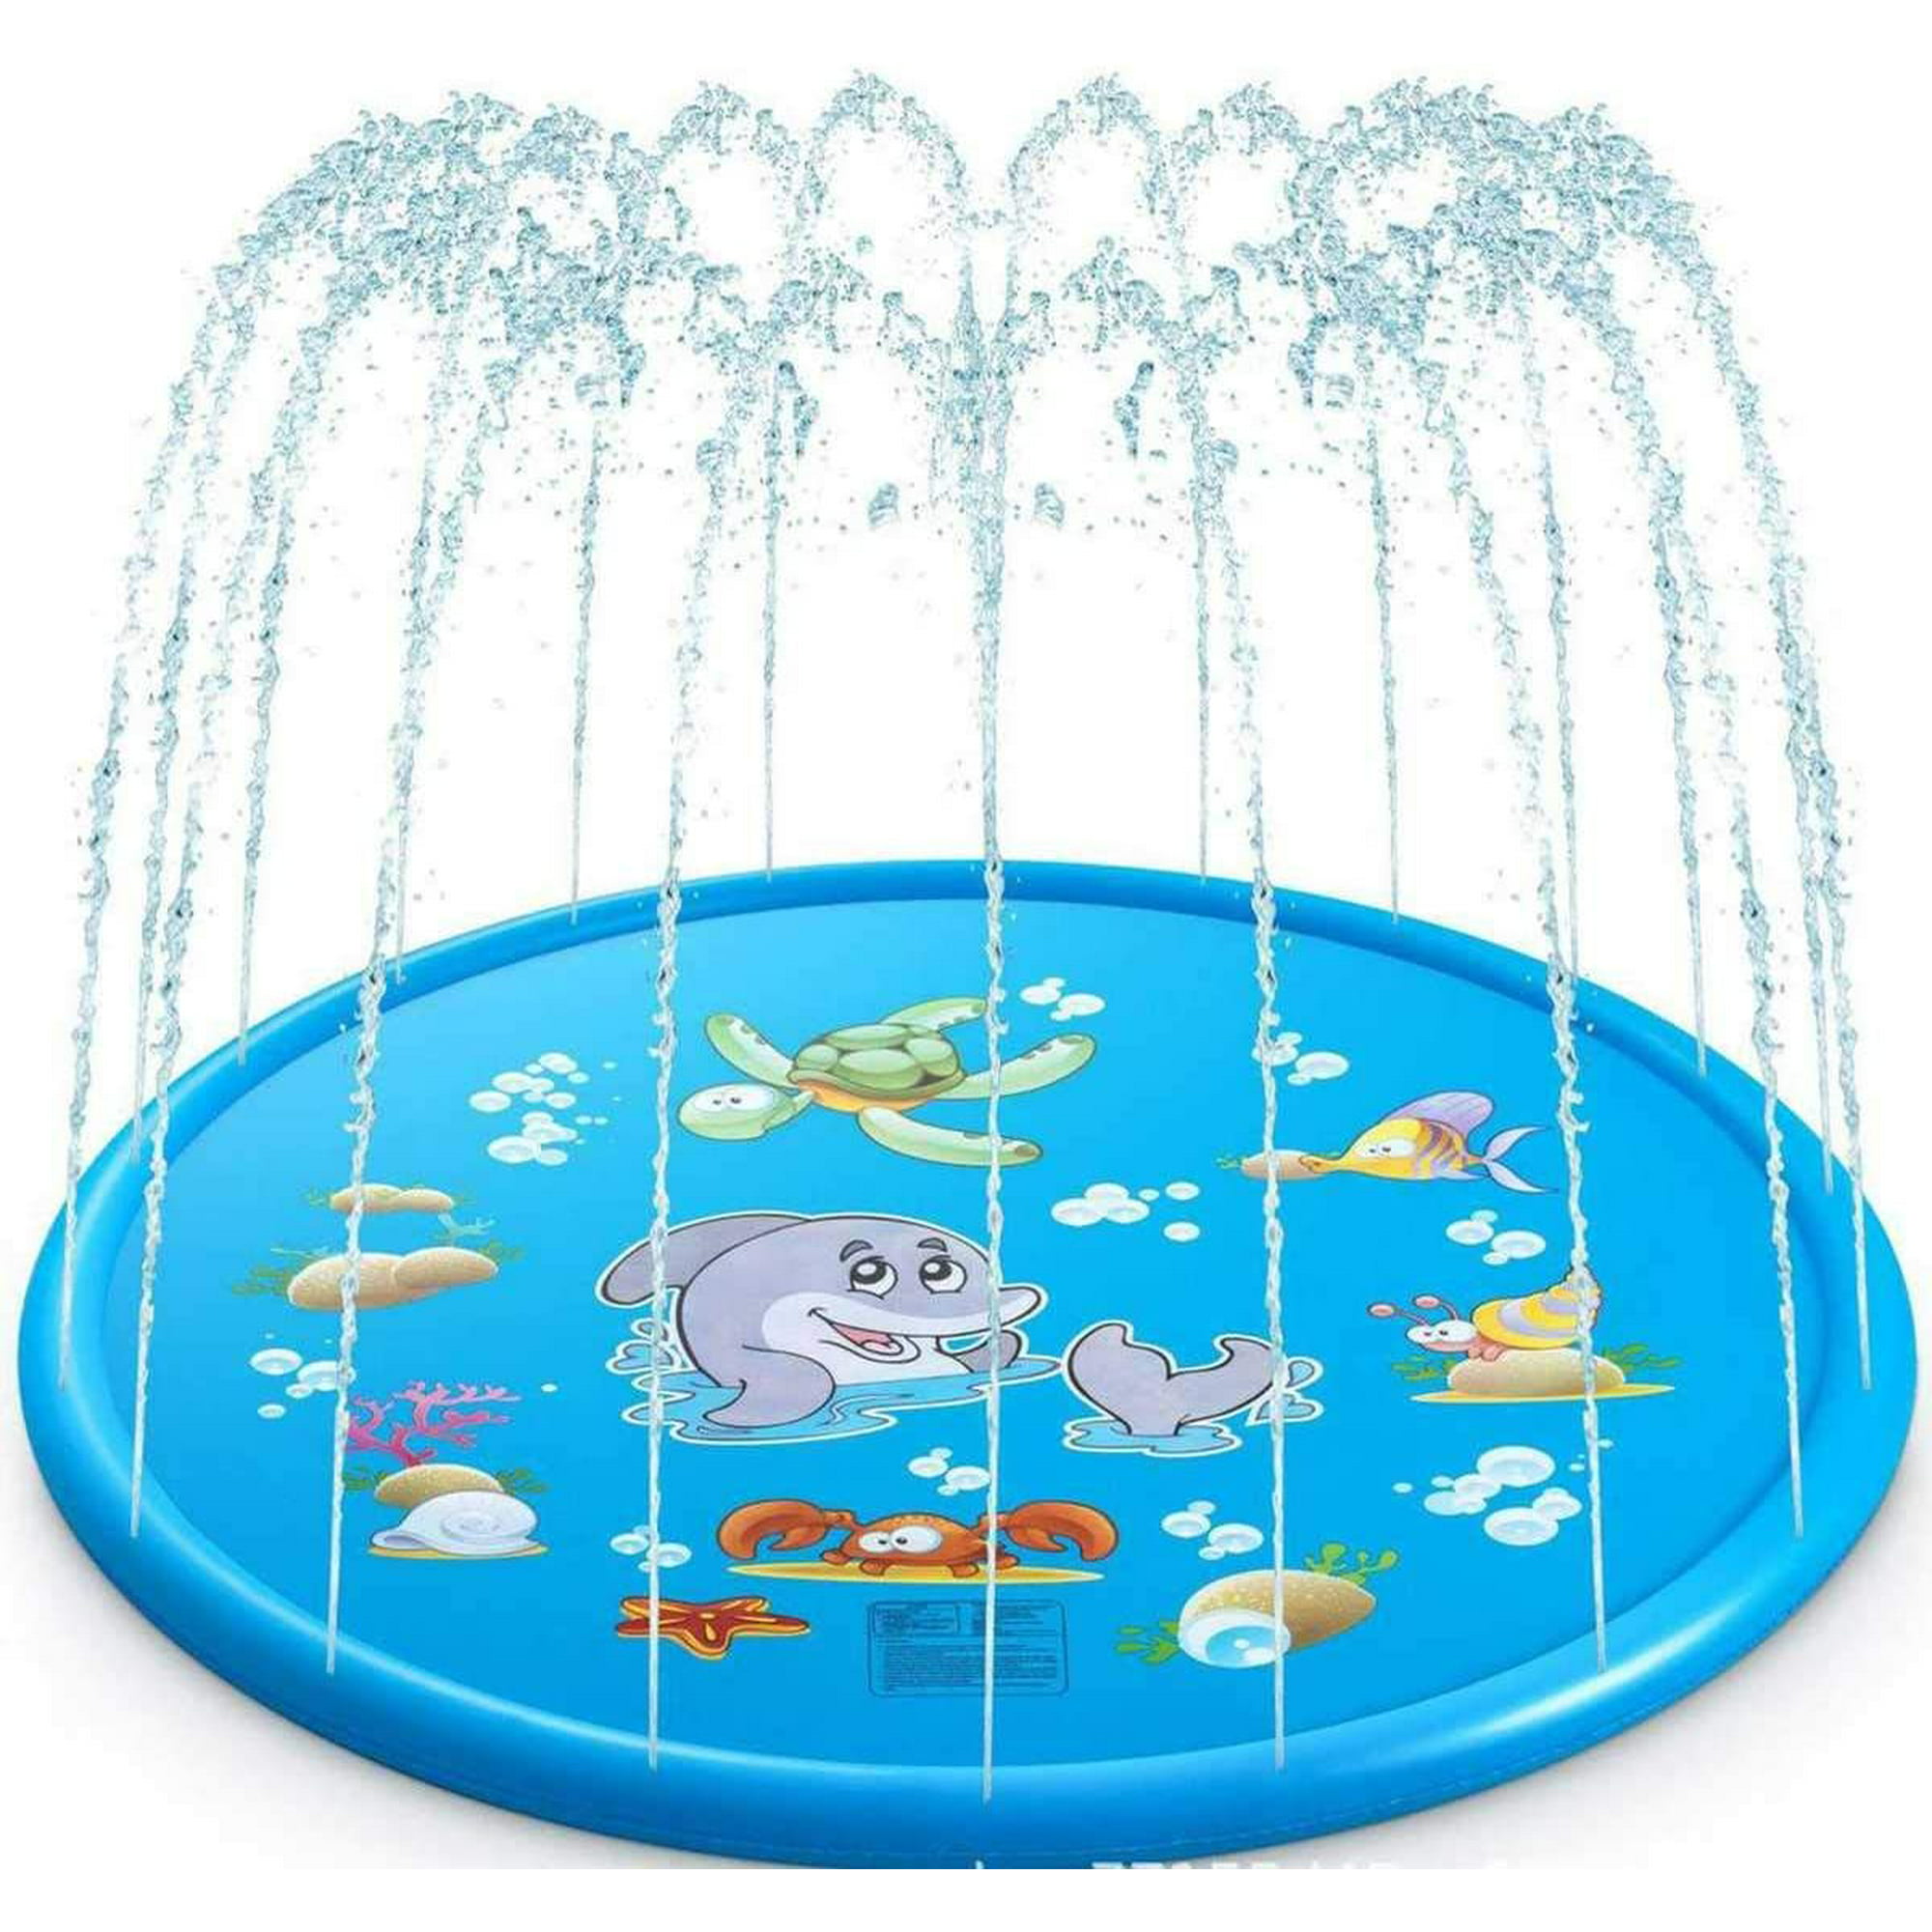 Inflatable Water Spray Kids Sprinkler Play Pad Mat Water Games Beach Mat  Cushion Toys for Children Age 1-5,Blue,170cm | Walmart Canada